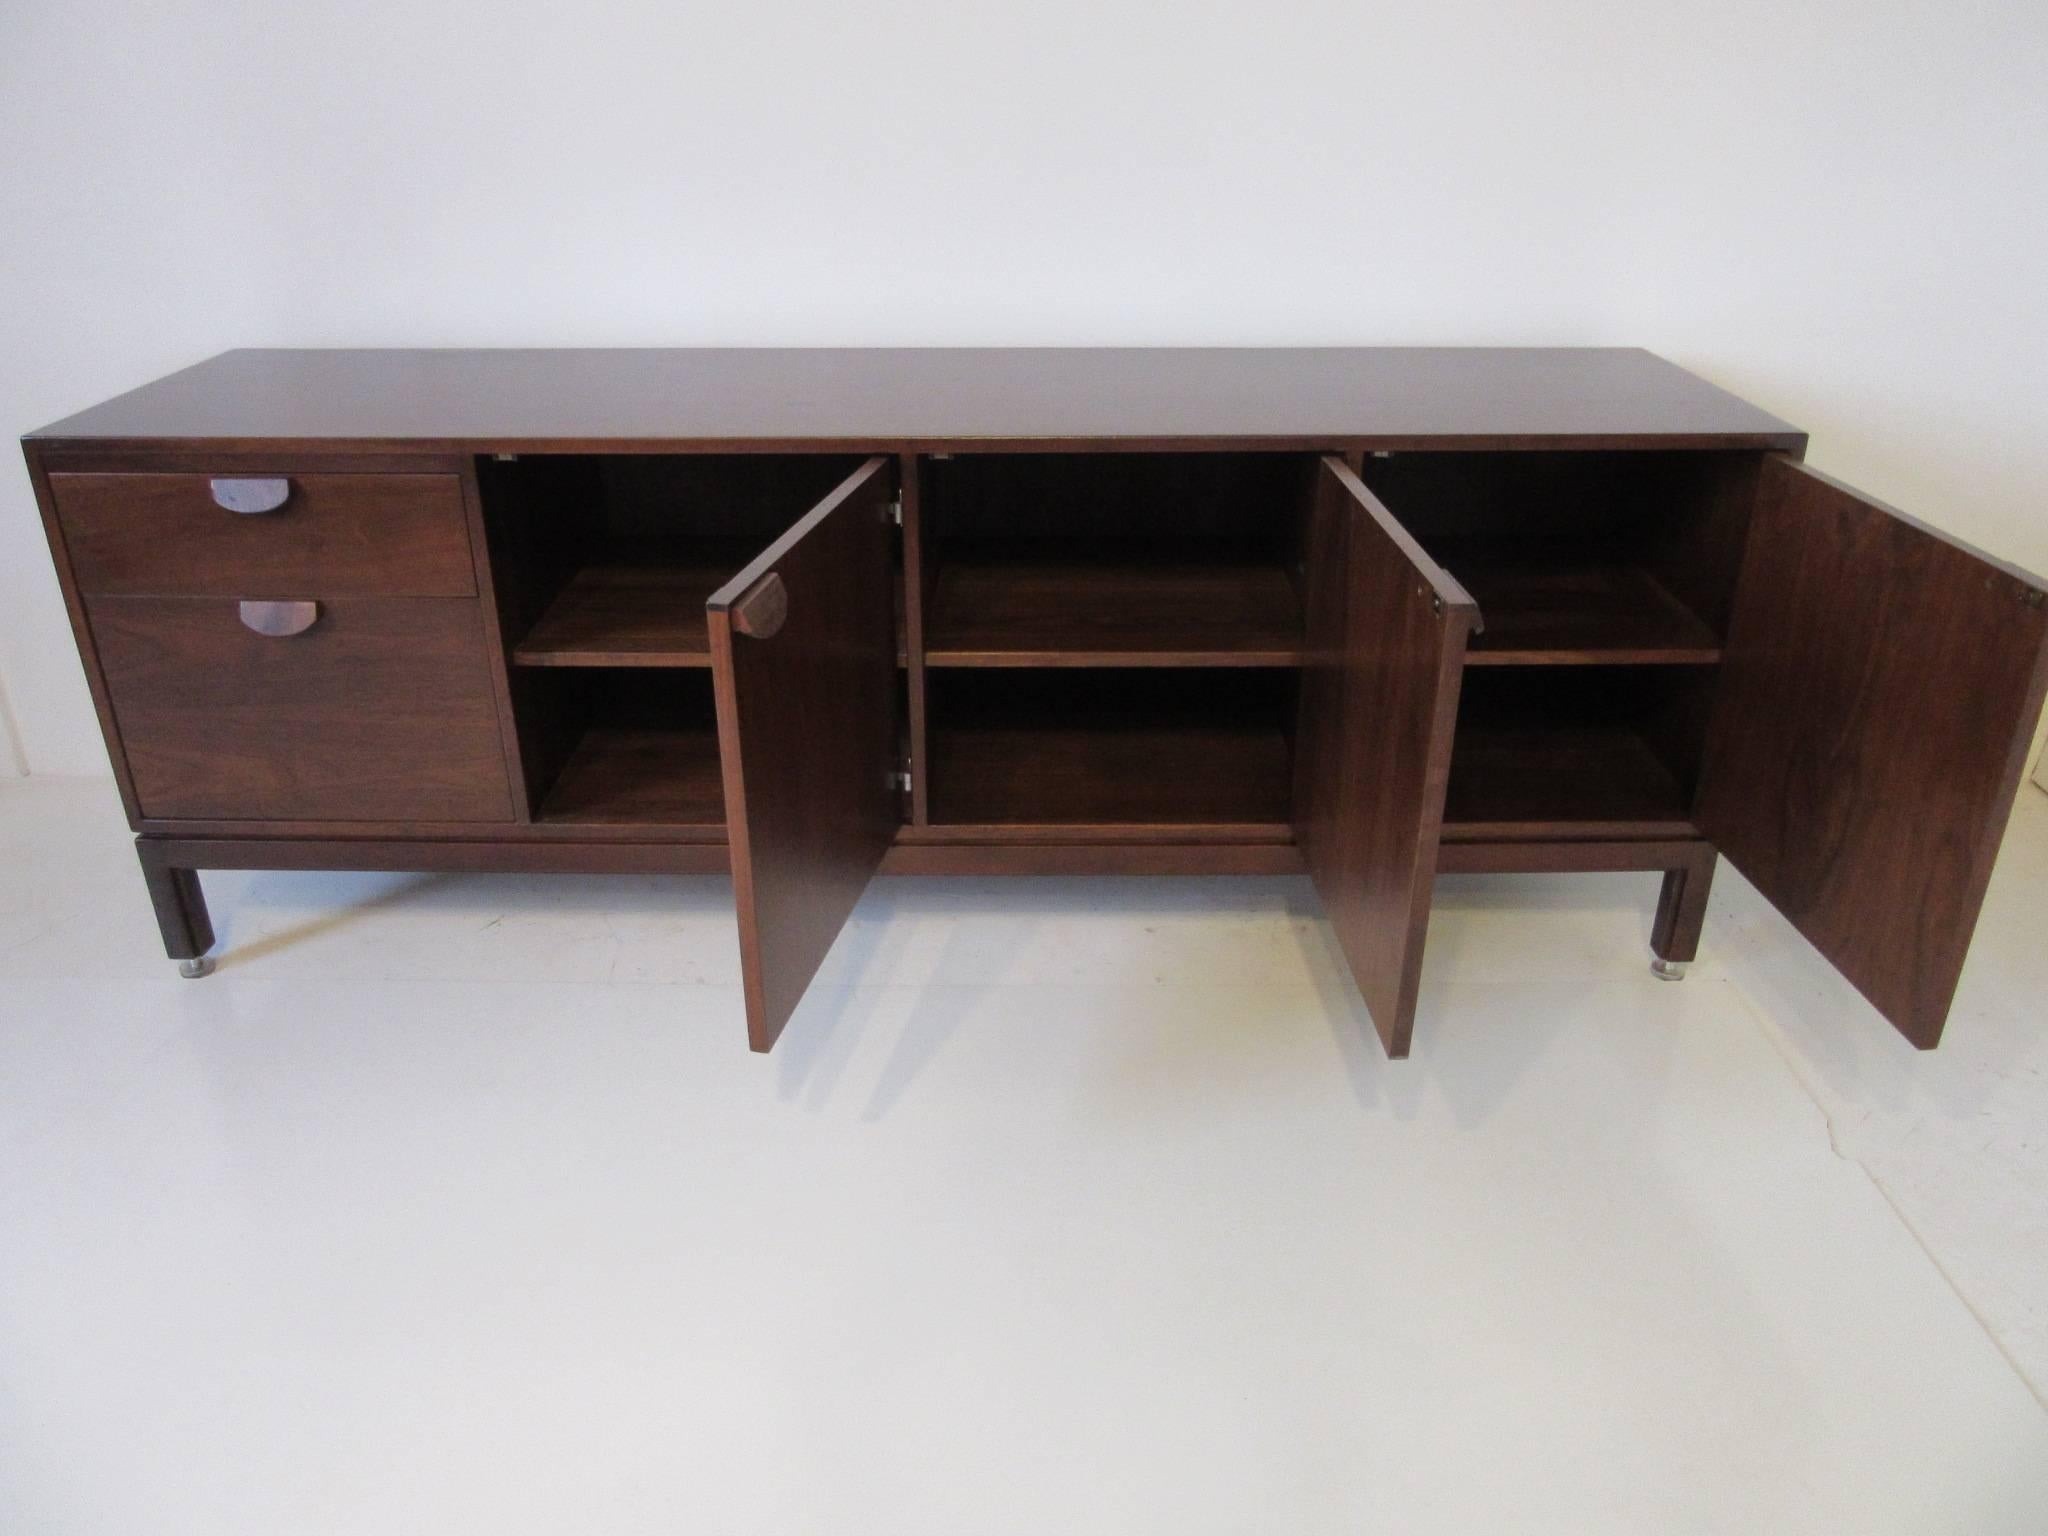 A dark walnut two-drawer and three door credenza with matching wooden pulls, stainless hinges and stainless adjustable foot pads. Finished to the backside with the same well grained walnut the inside contains storage and adjustable shelving. Finely